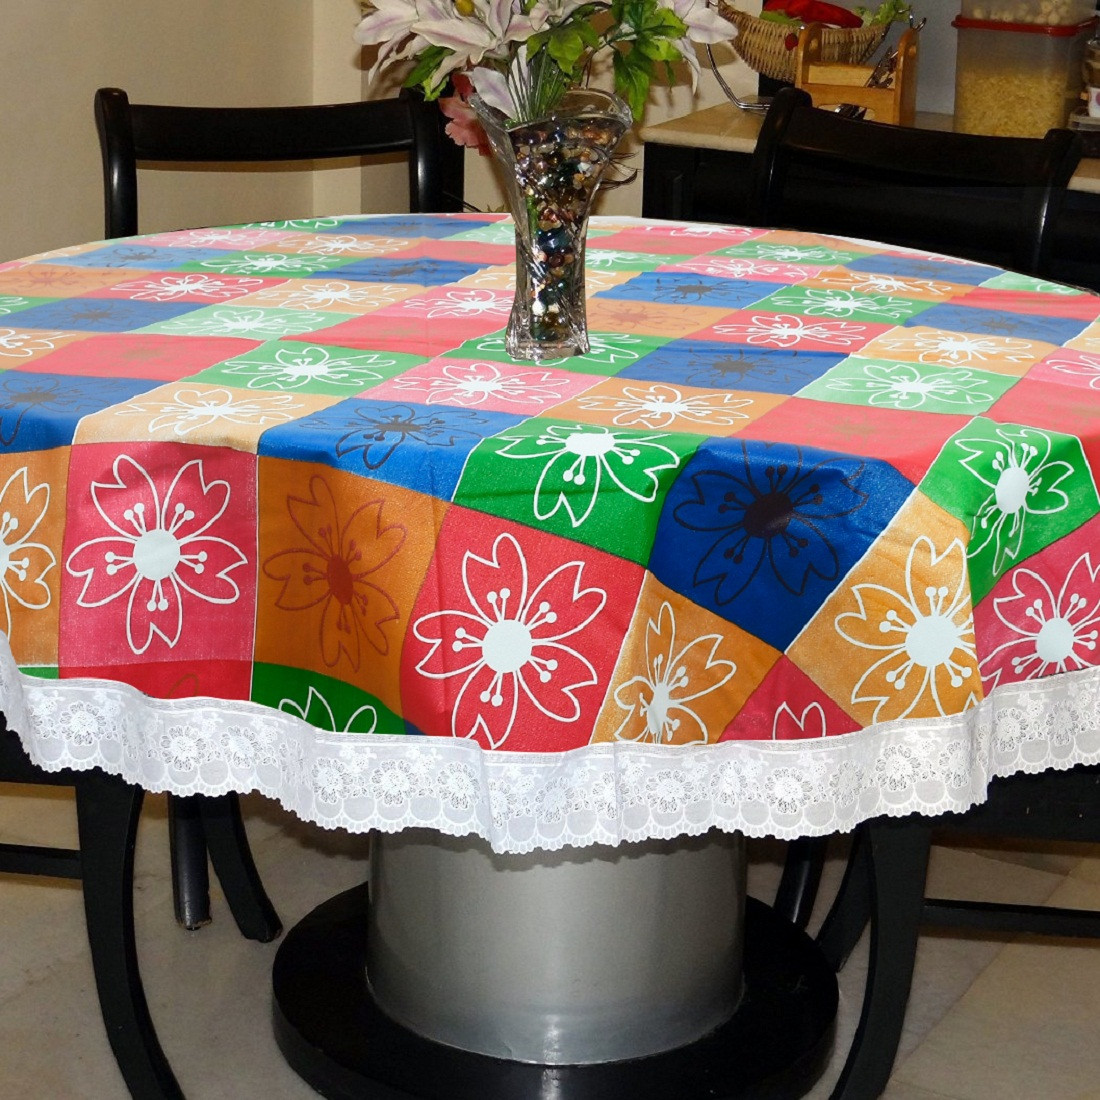 Kuber Industries Flower Print Round Table Cover 72 Inch-Waterproof PVC Resistant Spillproof PVC Fabric Table Cover for Dining Room Kitchen Party (Multi)-KUBMRT11827